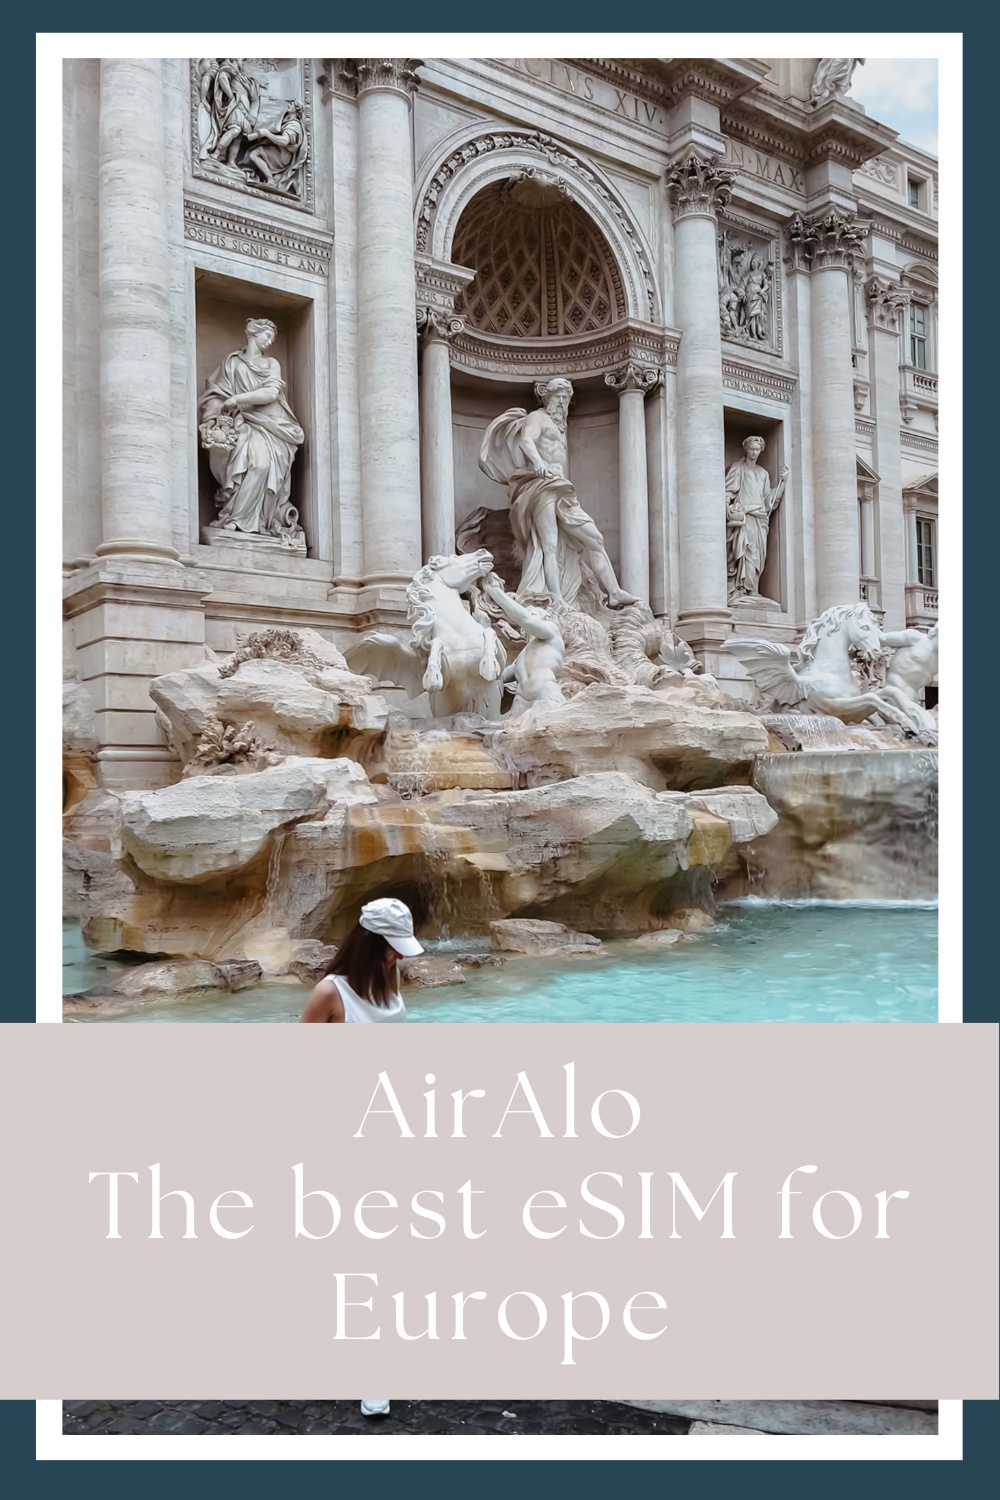 AirAlo-the best eSIM for Europe